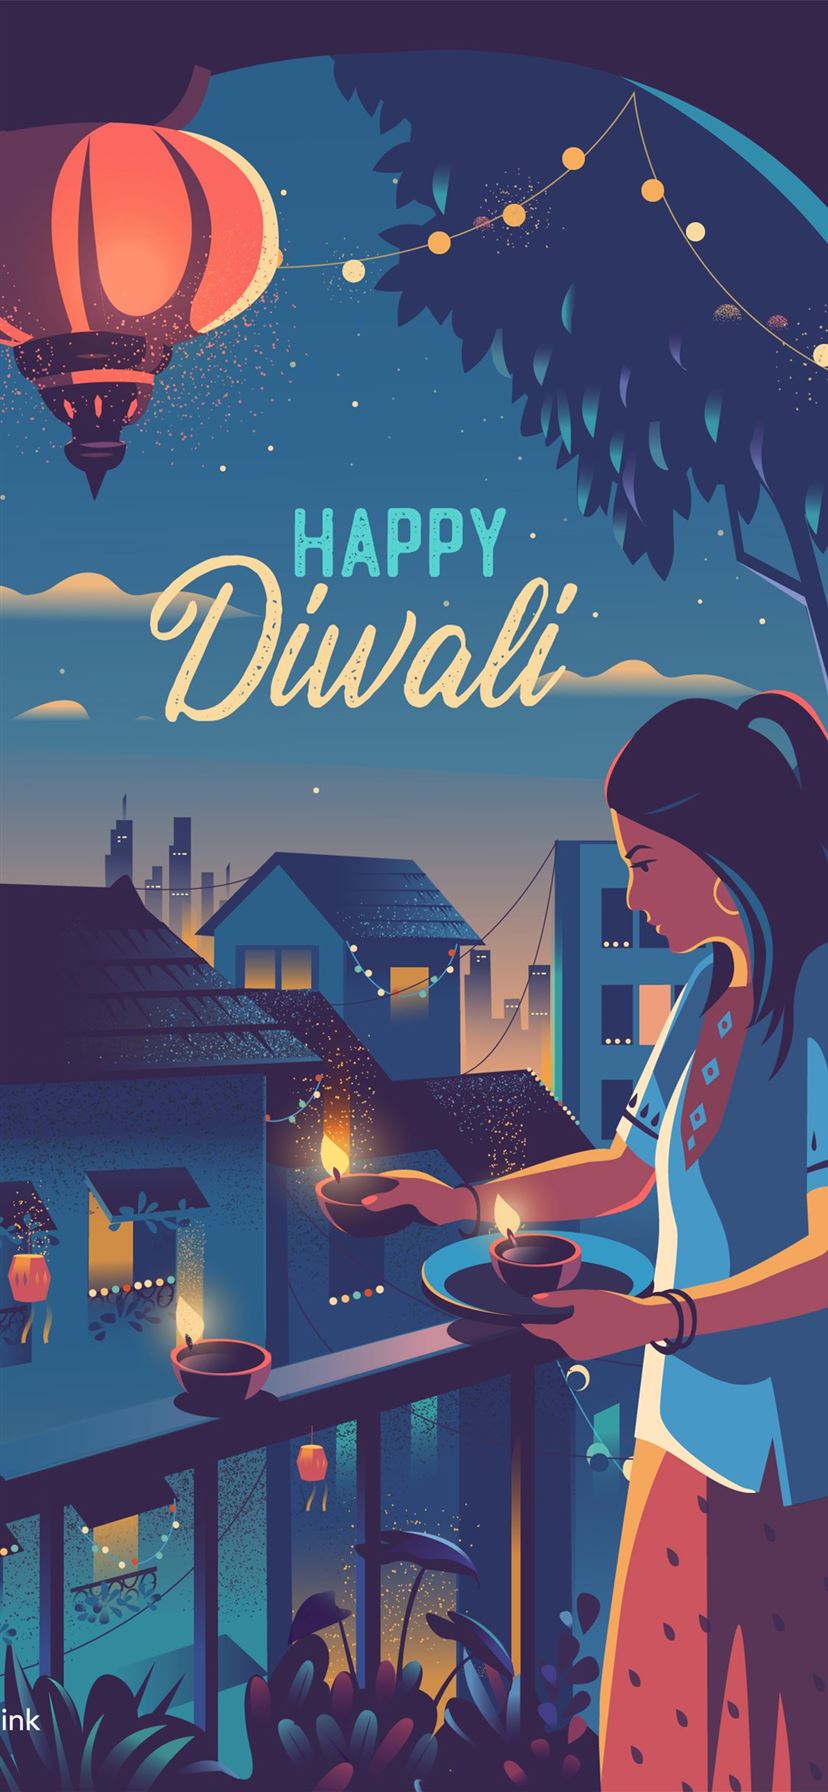 Happy Diwali by Ranganath iPhone Wallpapers Free Download